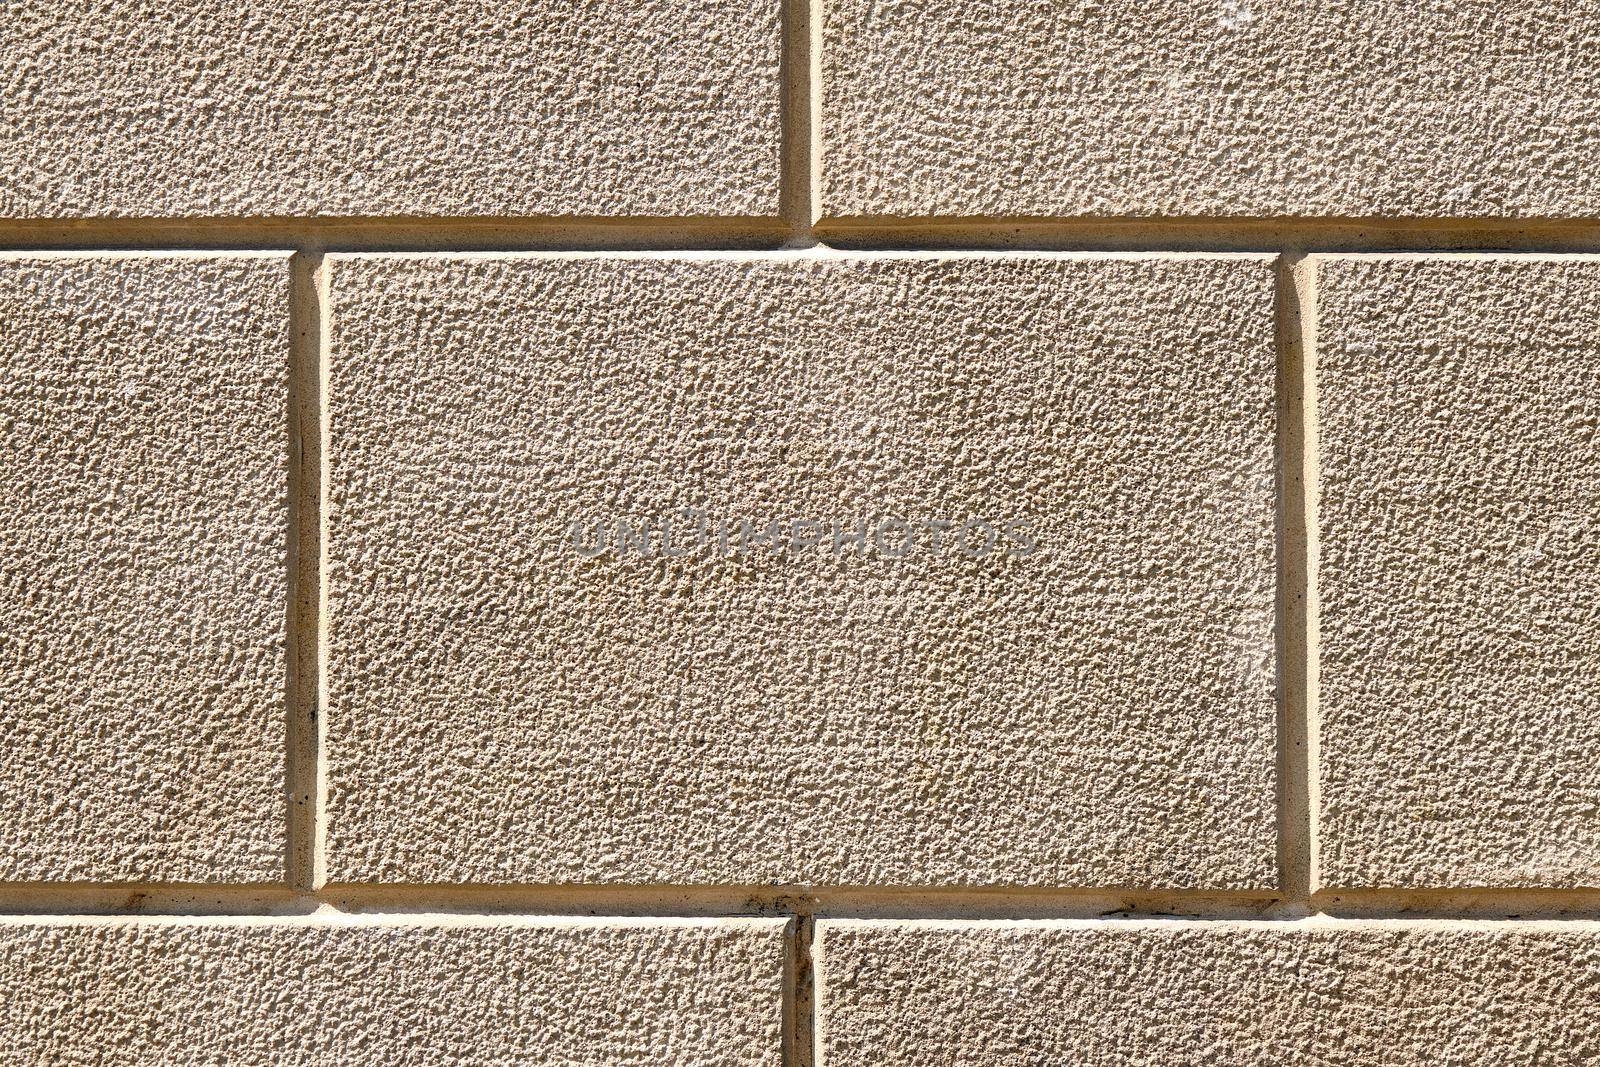 Background from a wall with rectangular beige stone slabs